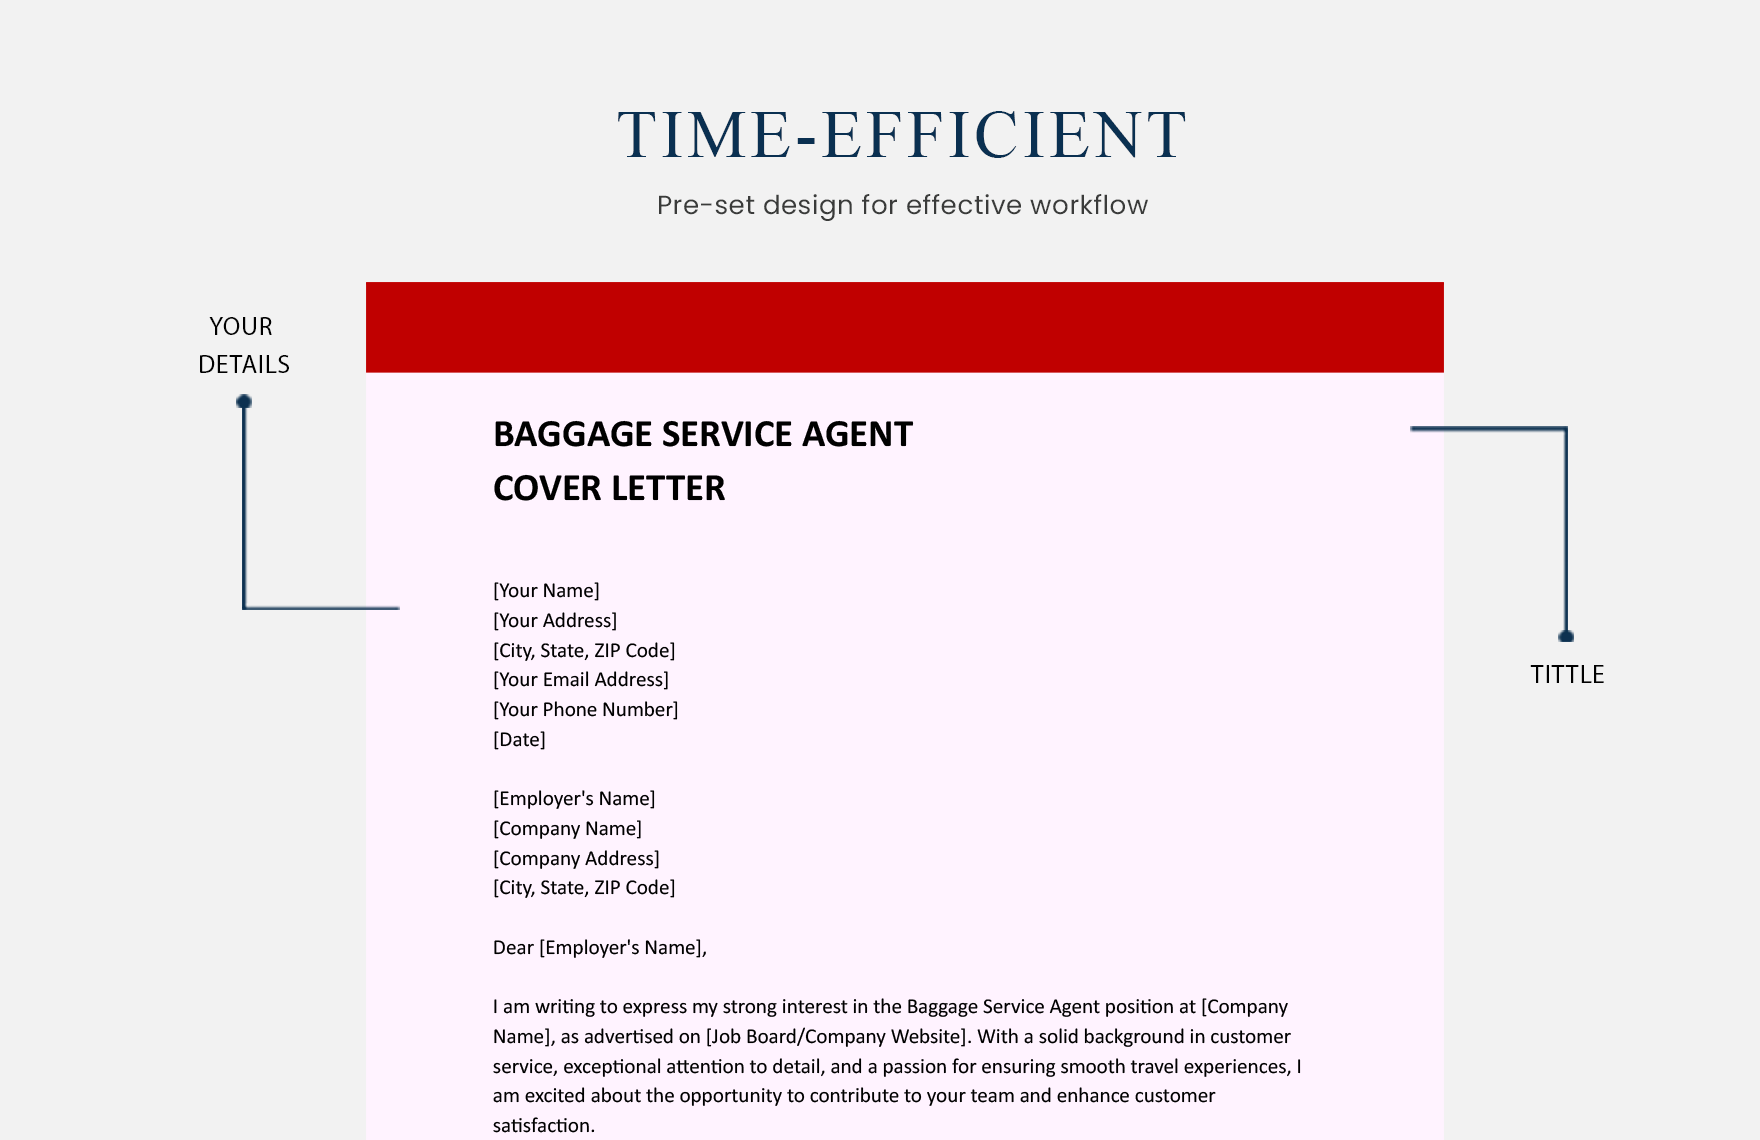 Baggage Service Agent Cover Letter